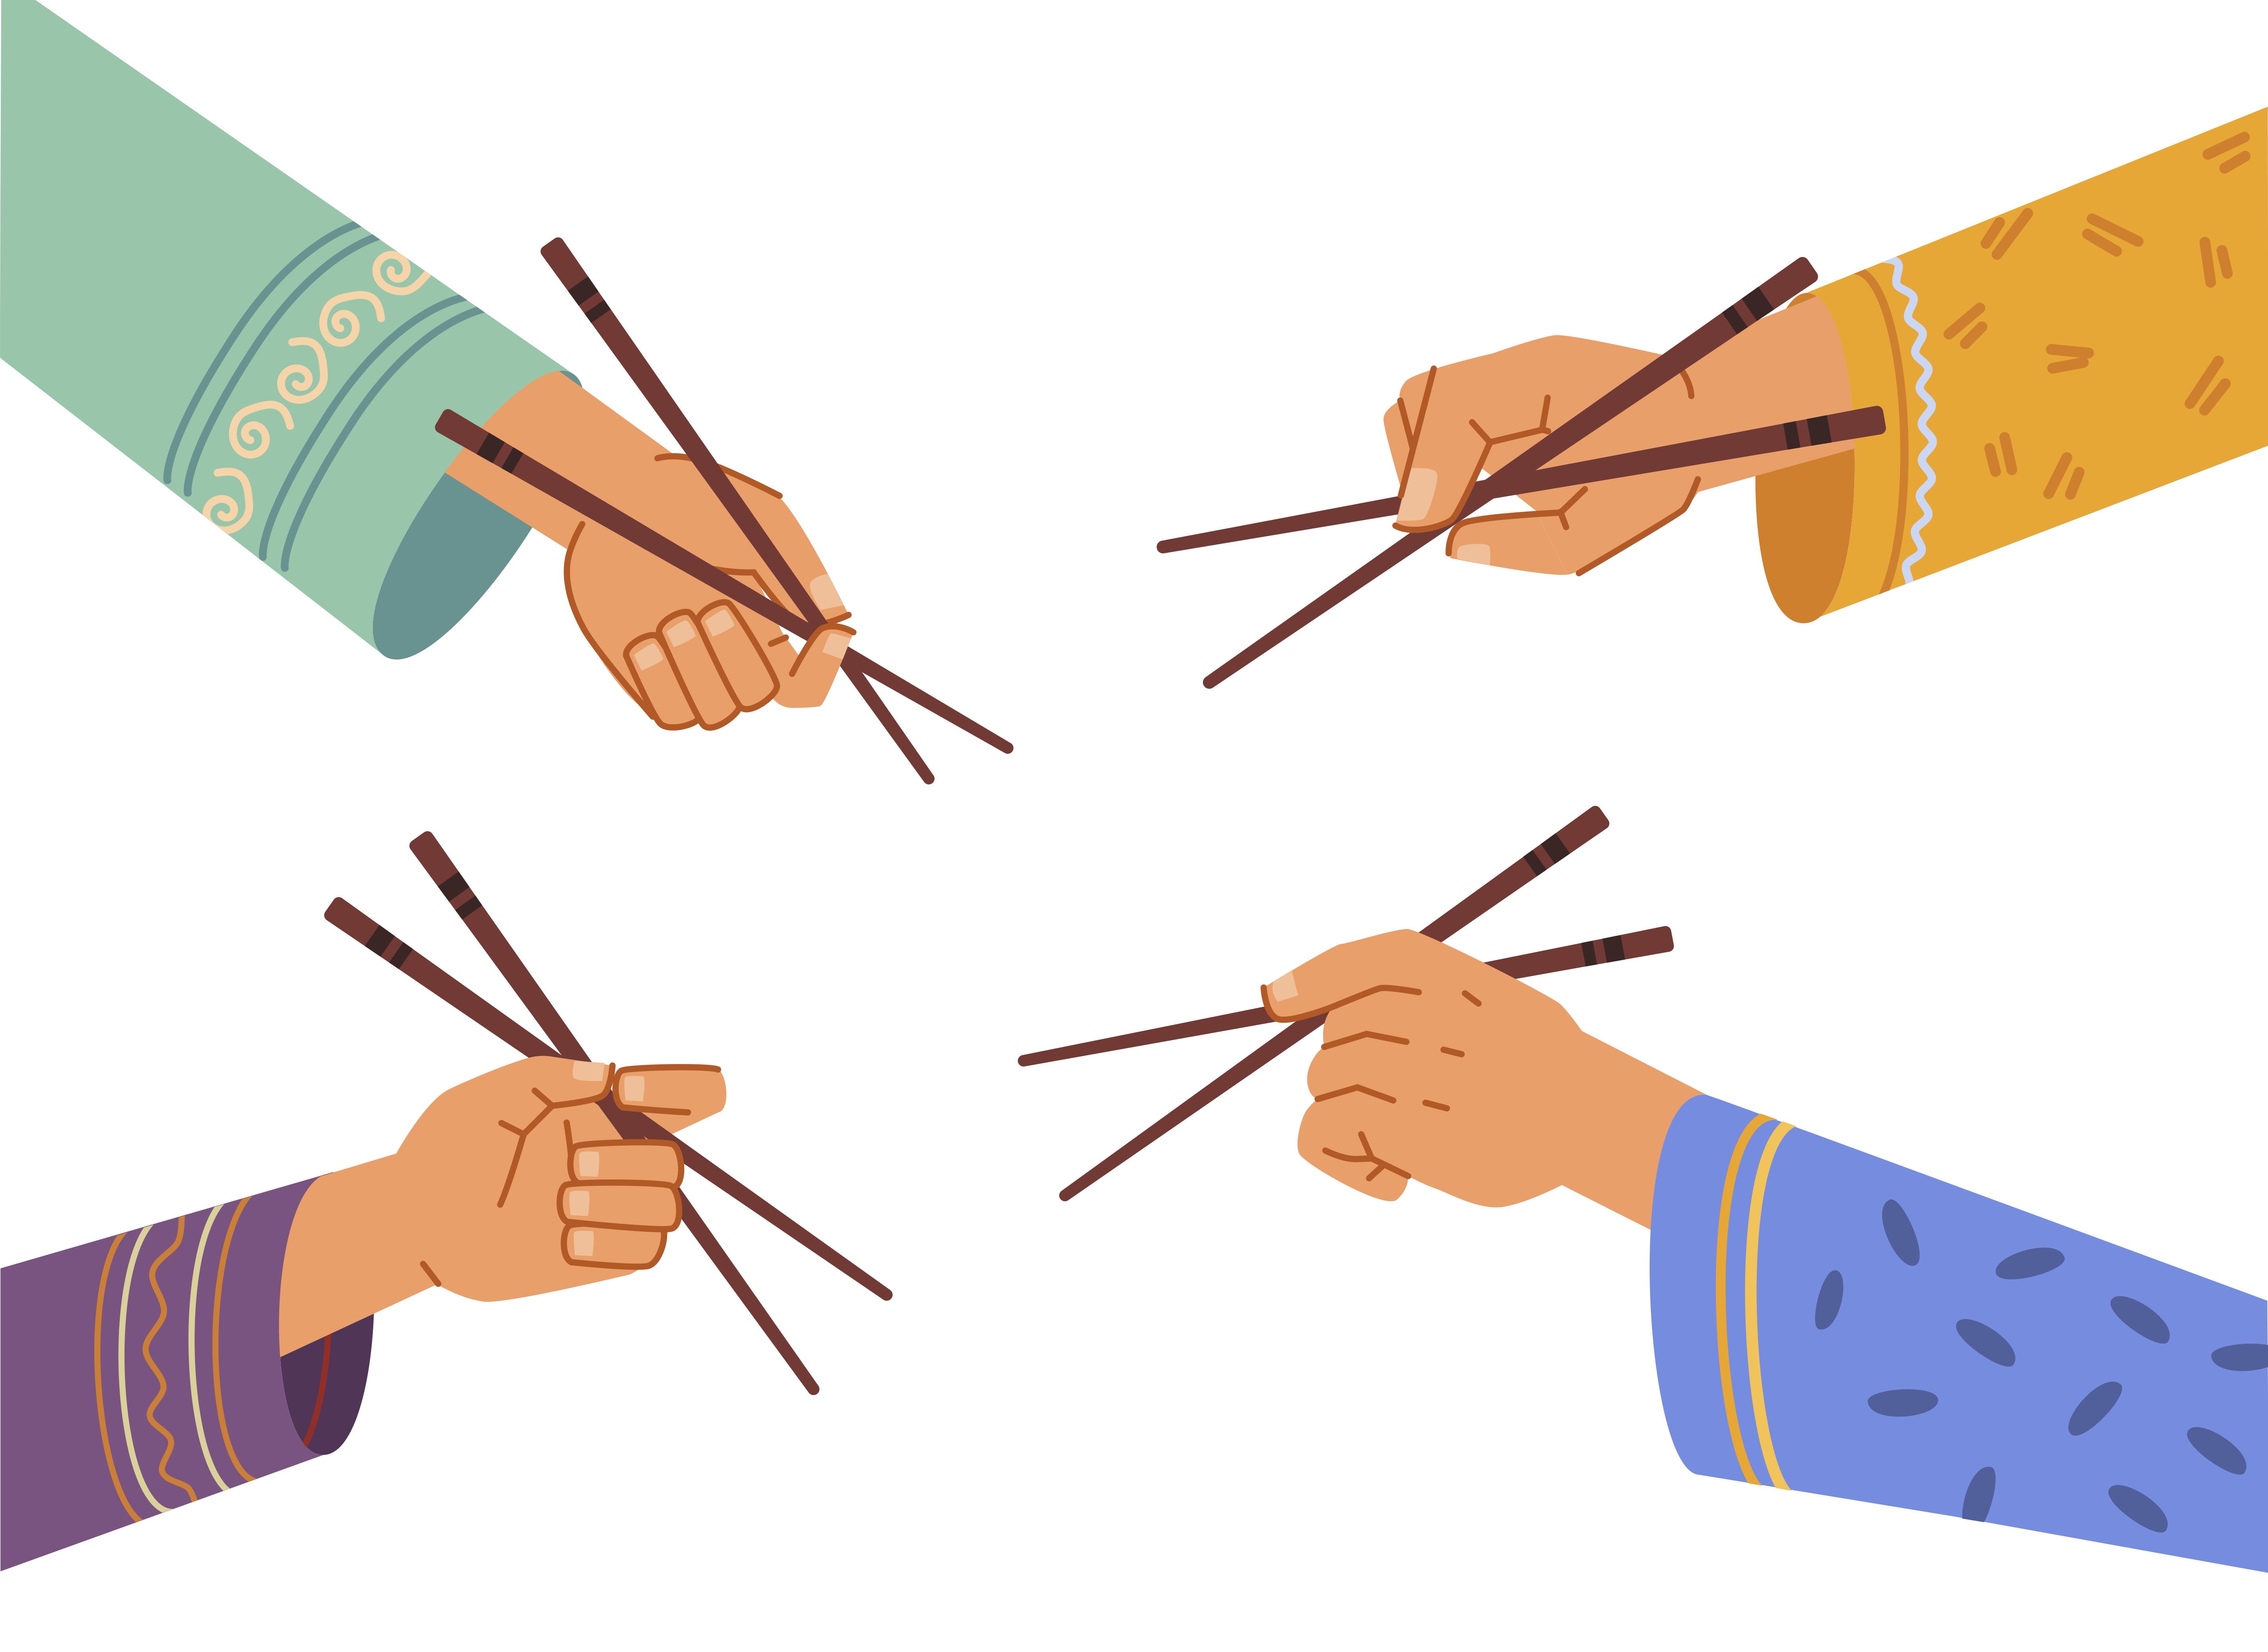 Different positions to use when holding chopsticks | Source: Shutterstock